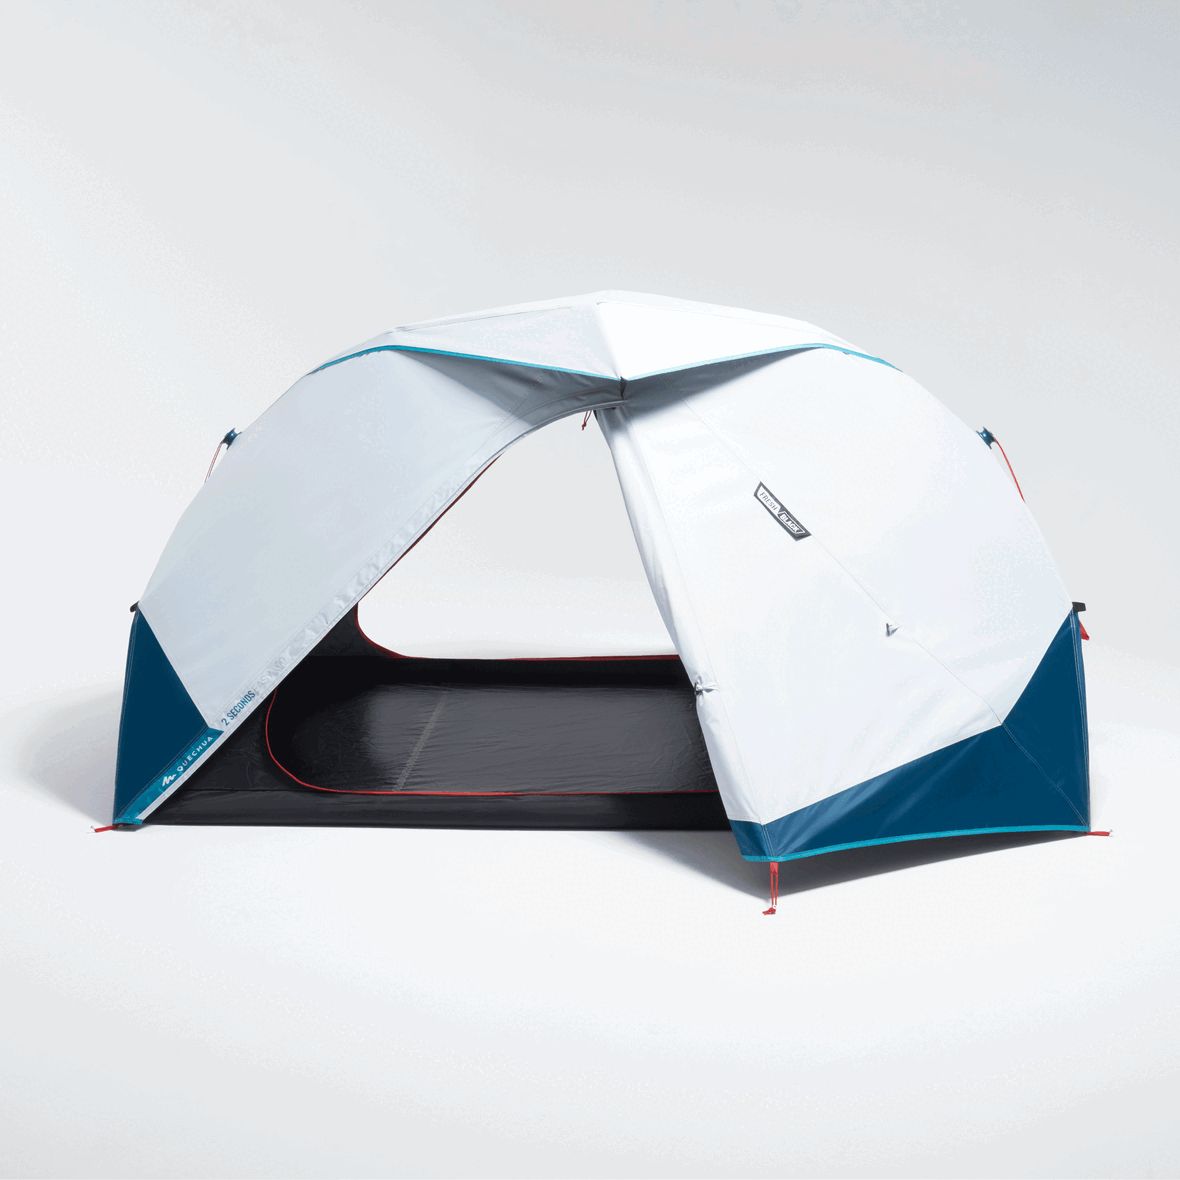 FAMILY TENT WITH POLES - ARPENAZ 4.2 - 4 PEOPLE | 2016